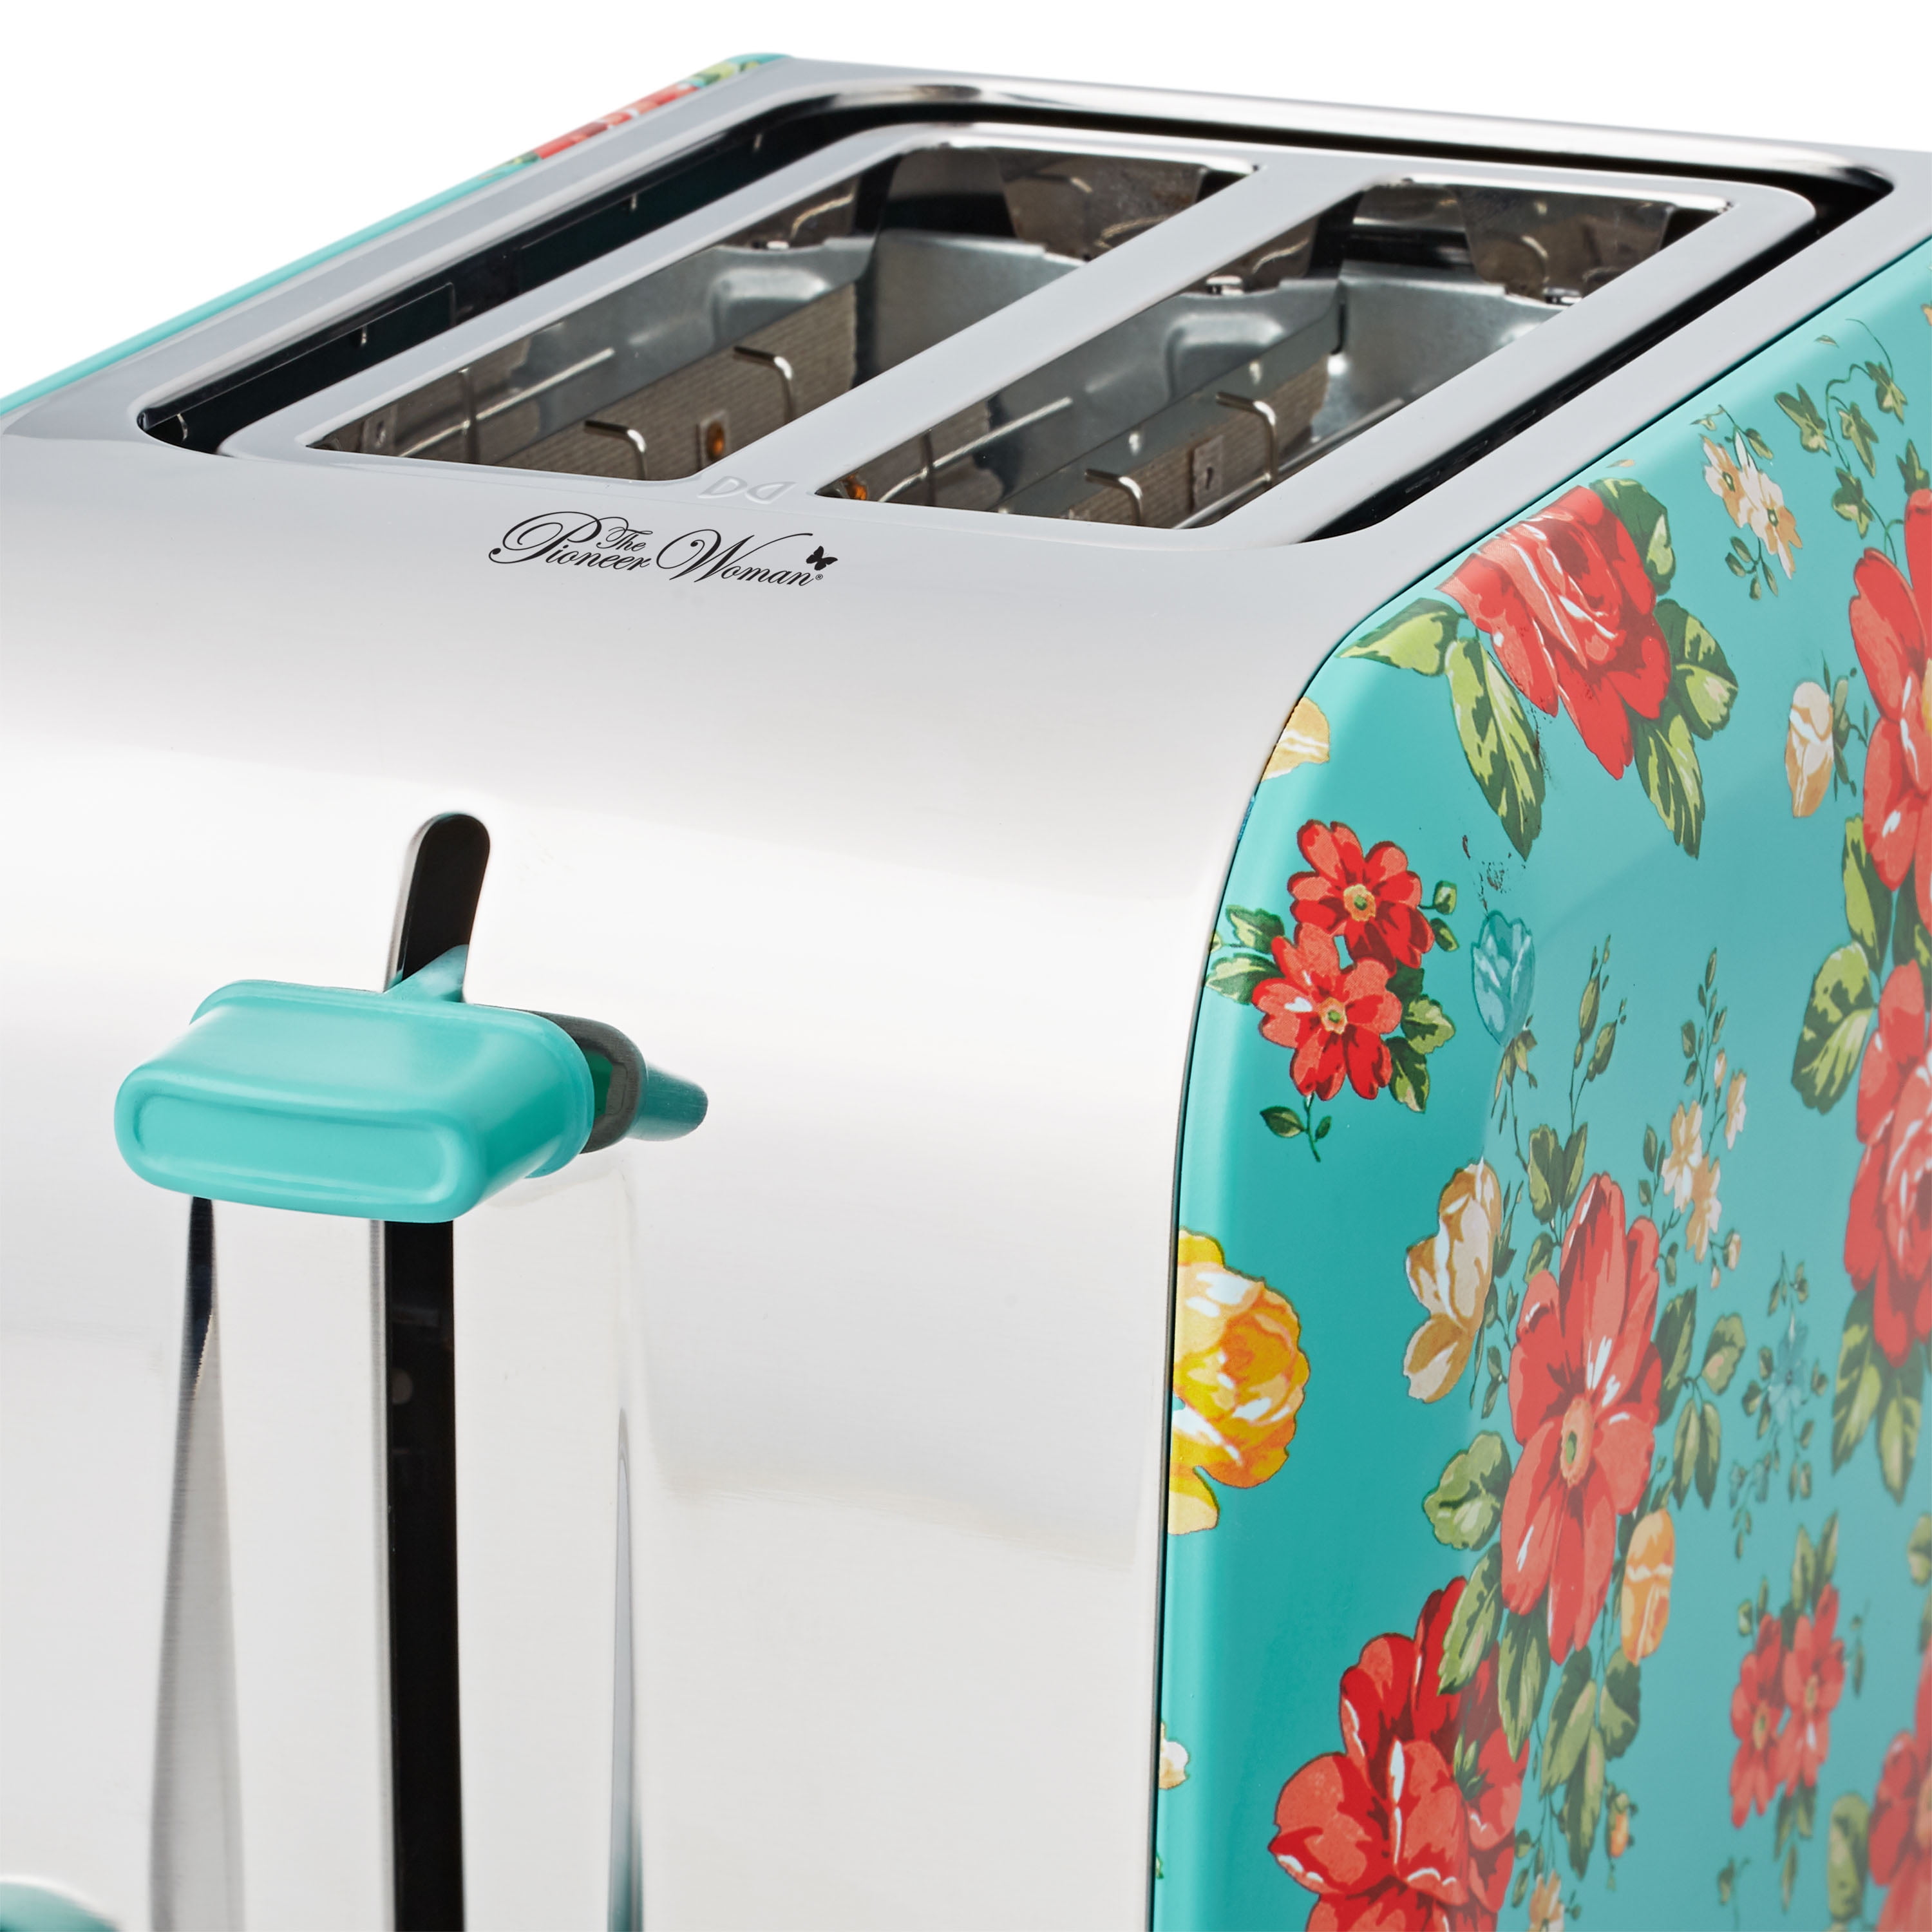 The Pioneer Woman Vintage Floral Green 2 Slice Toaster – The